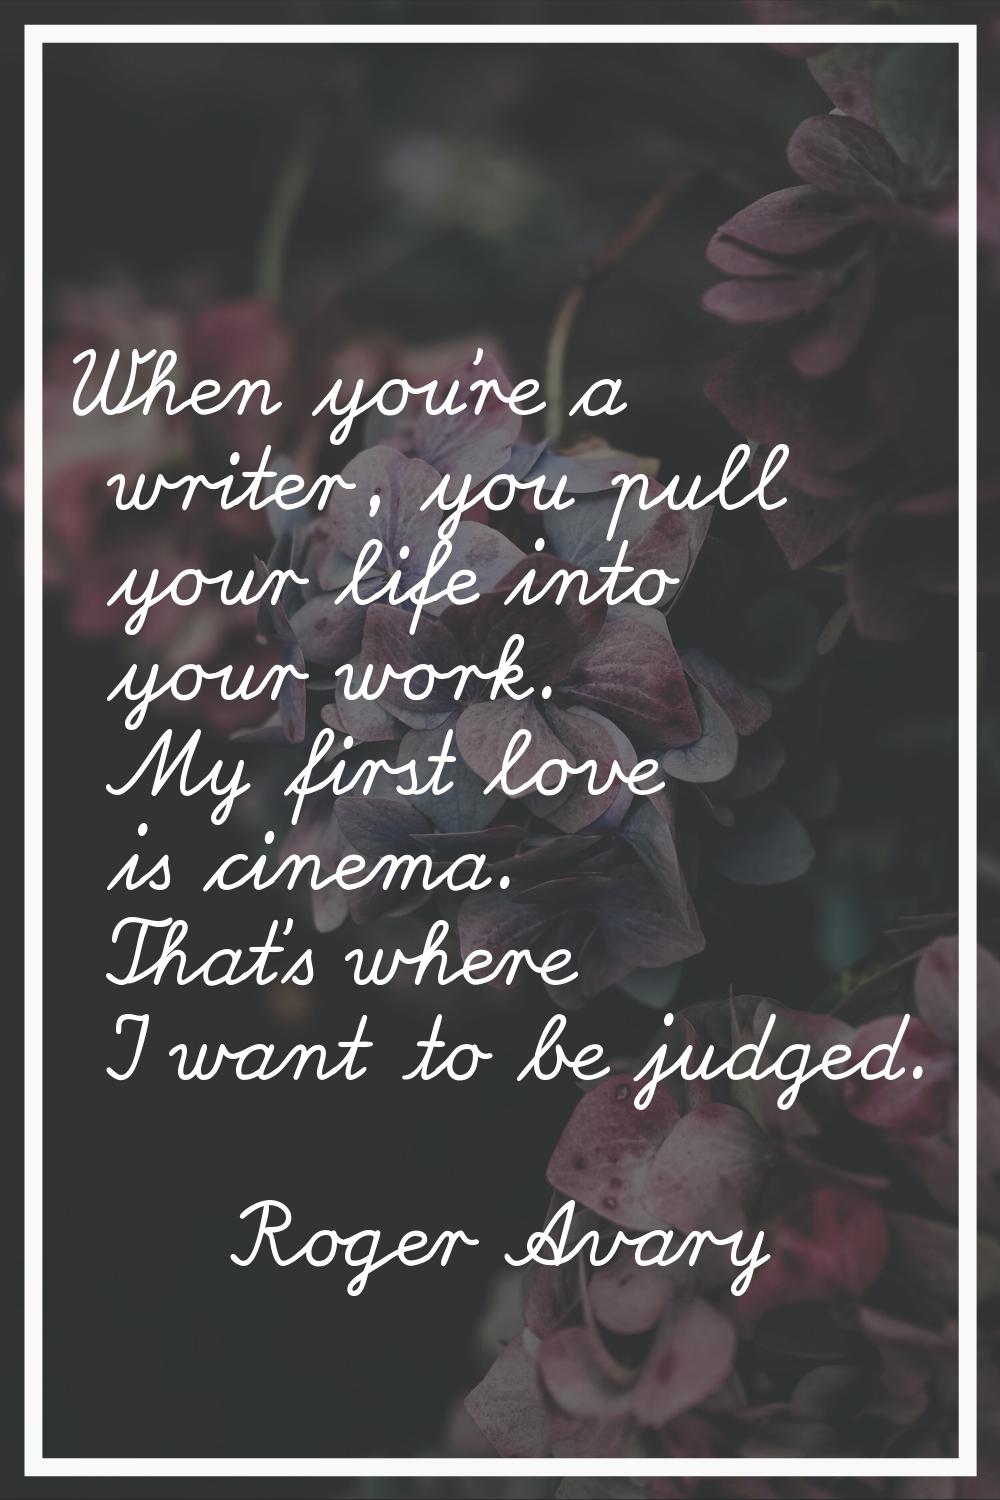 When you're a writer, you pull your life into your work. My first love is cinema. That's where I wa